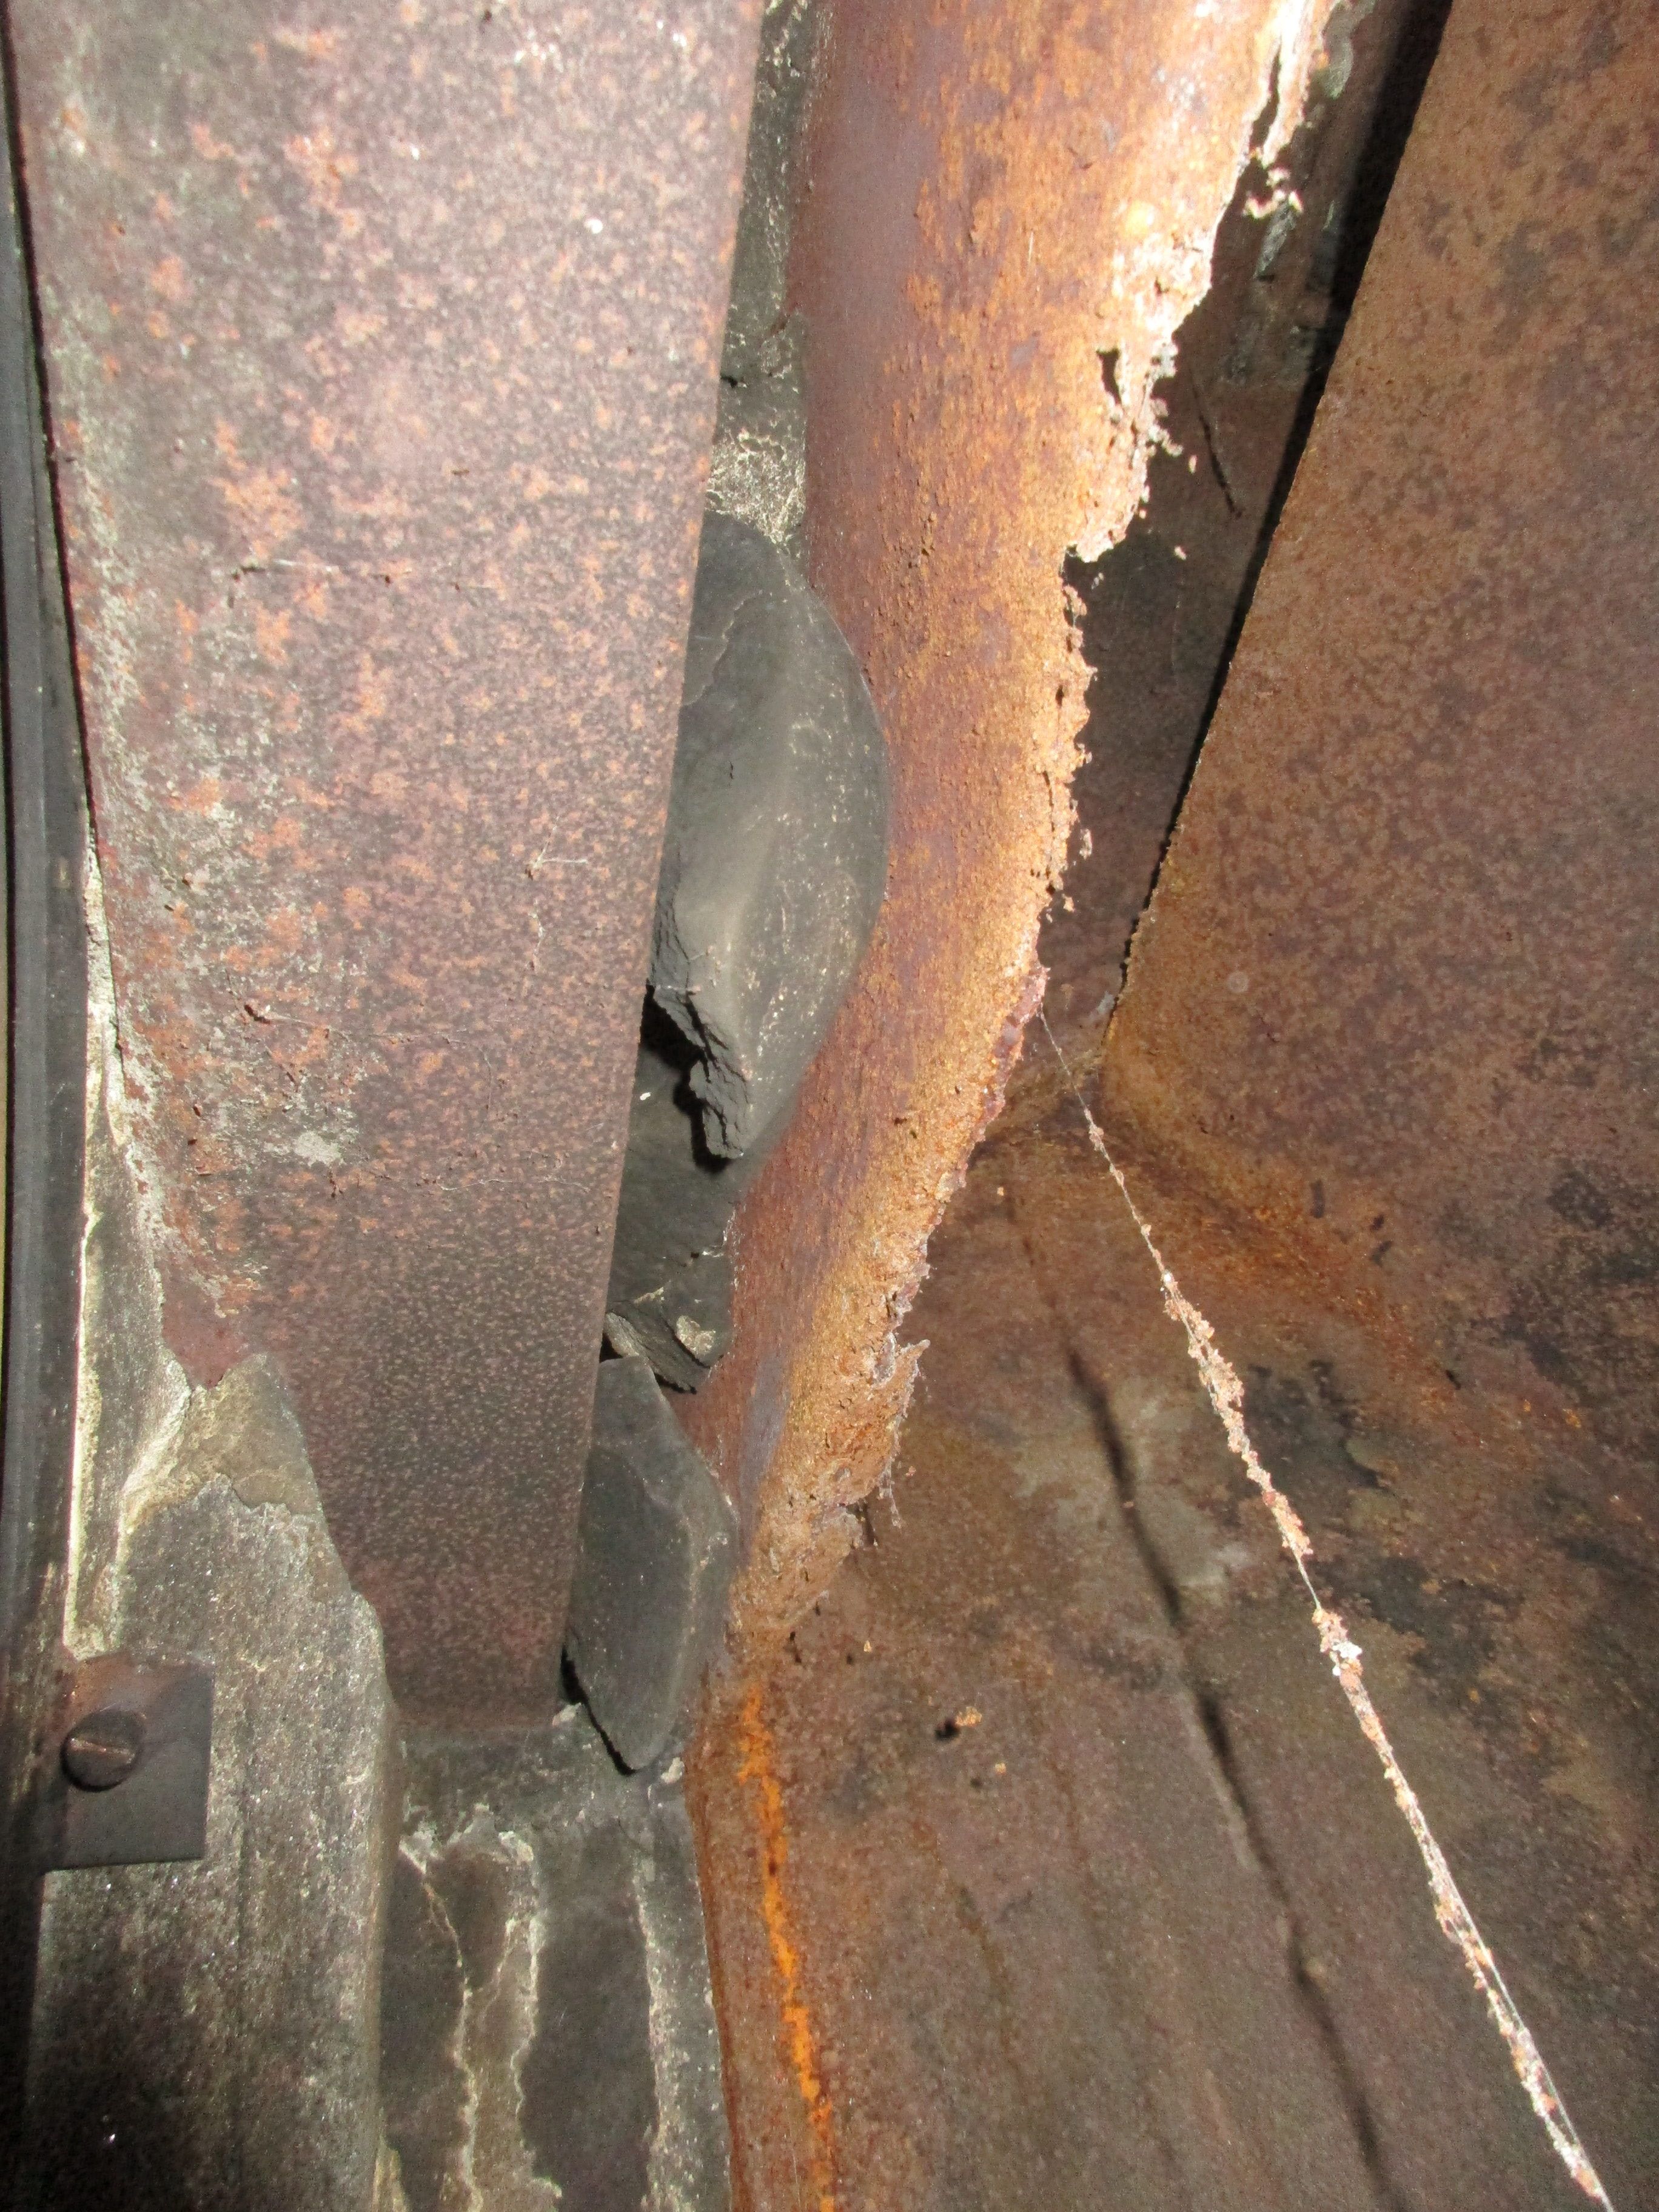 Fireplace Firebox Repair Lovely Rusting Firebox and Missing Mortar Seal Has Created A Fire